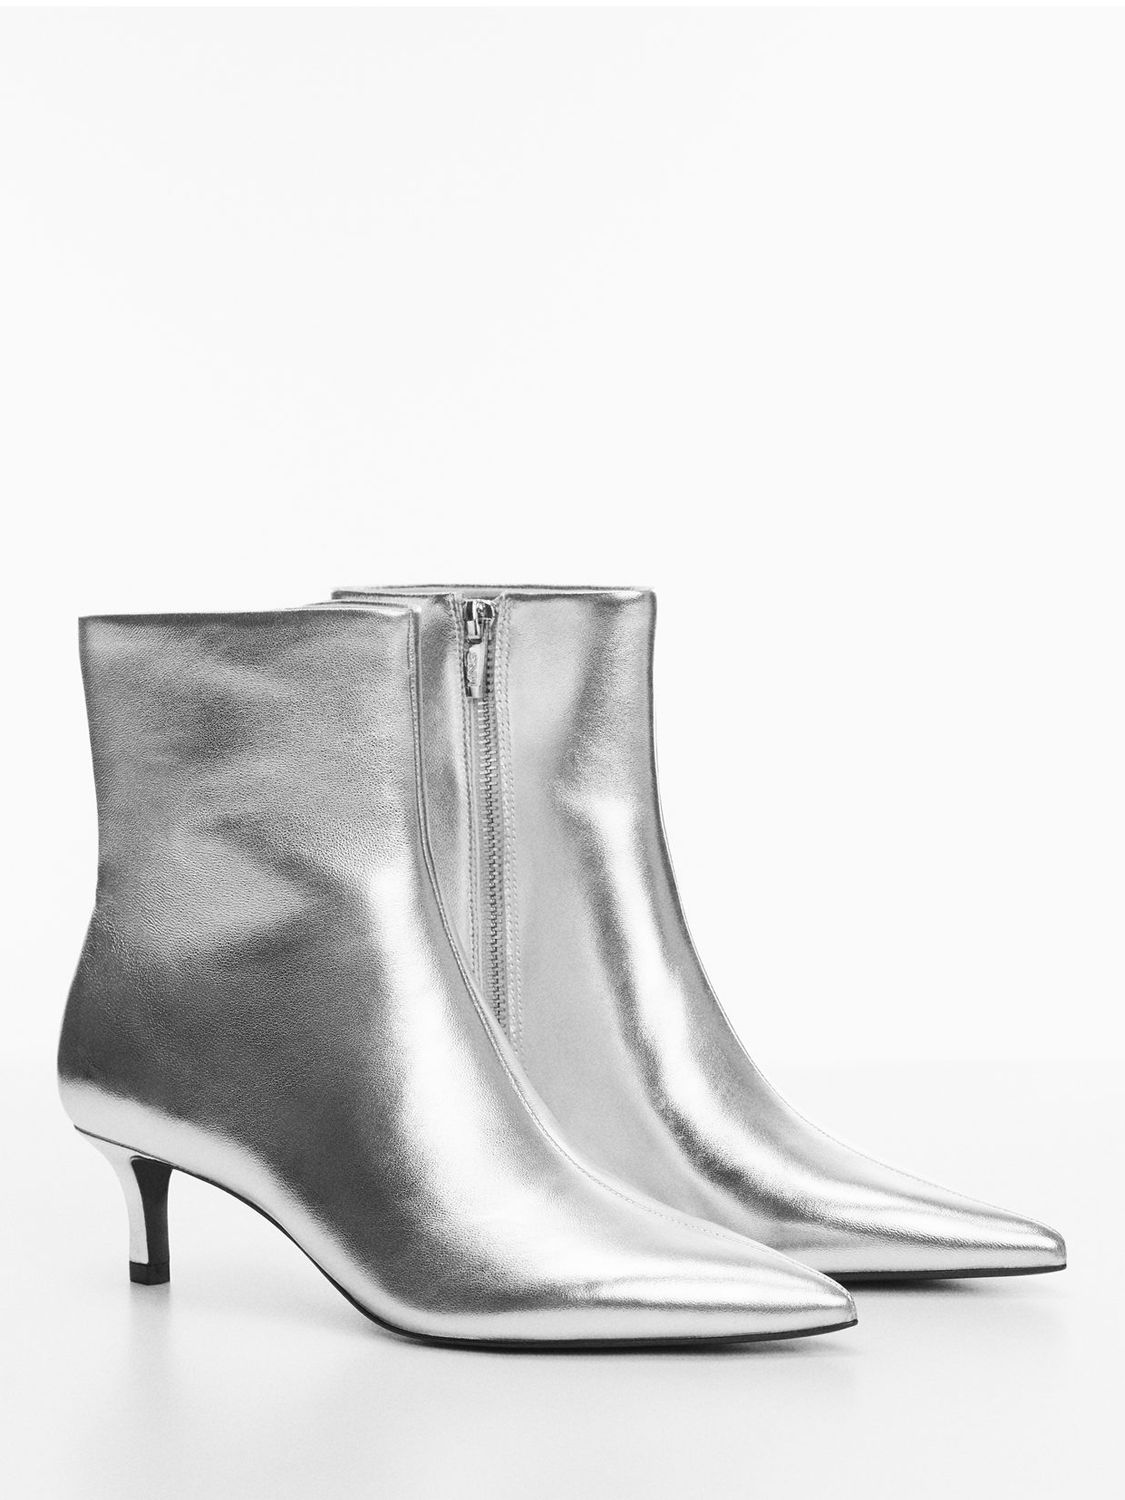 Mango Dadly Kitten Heel Leather Ankle Boots, Silver at John Lewis ...